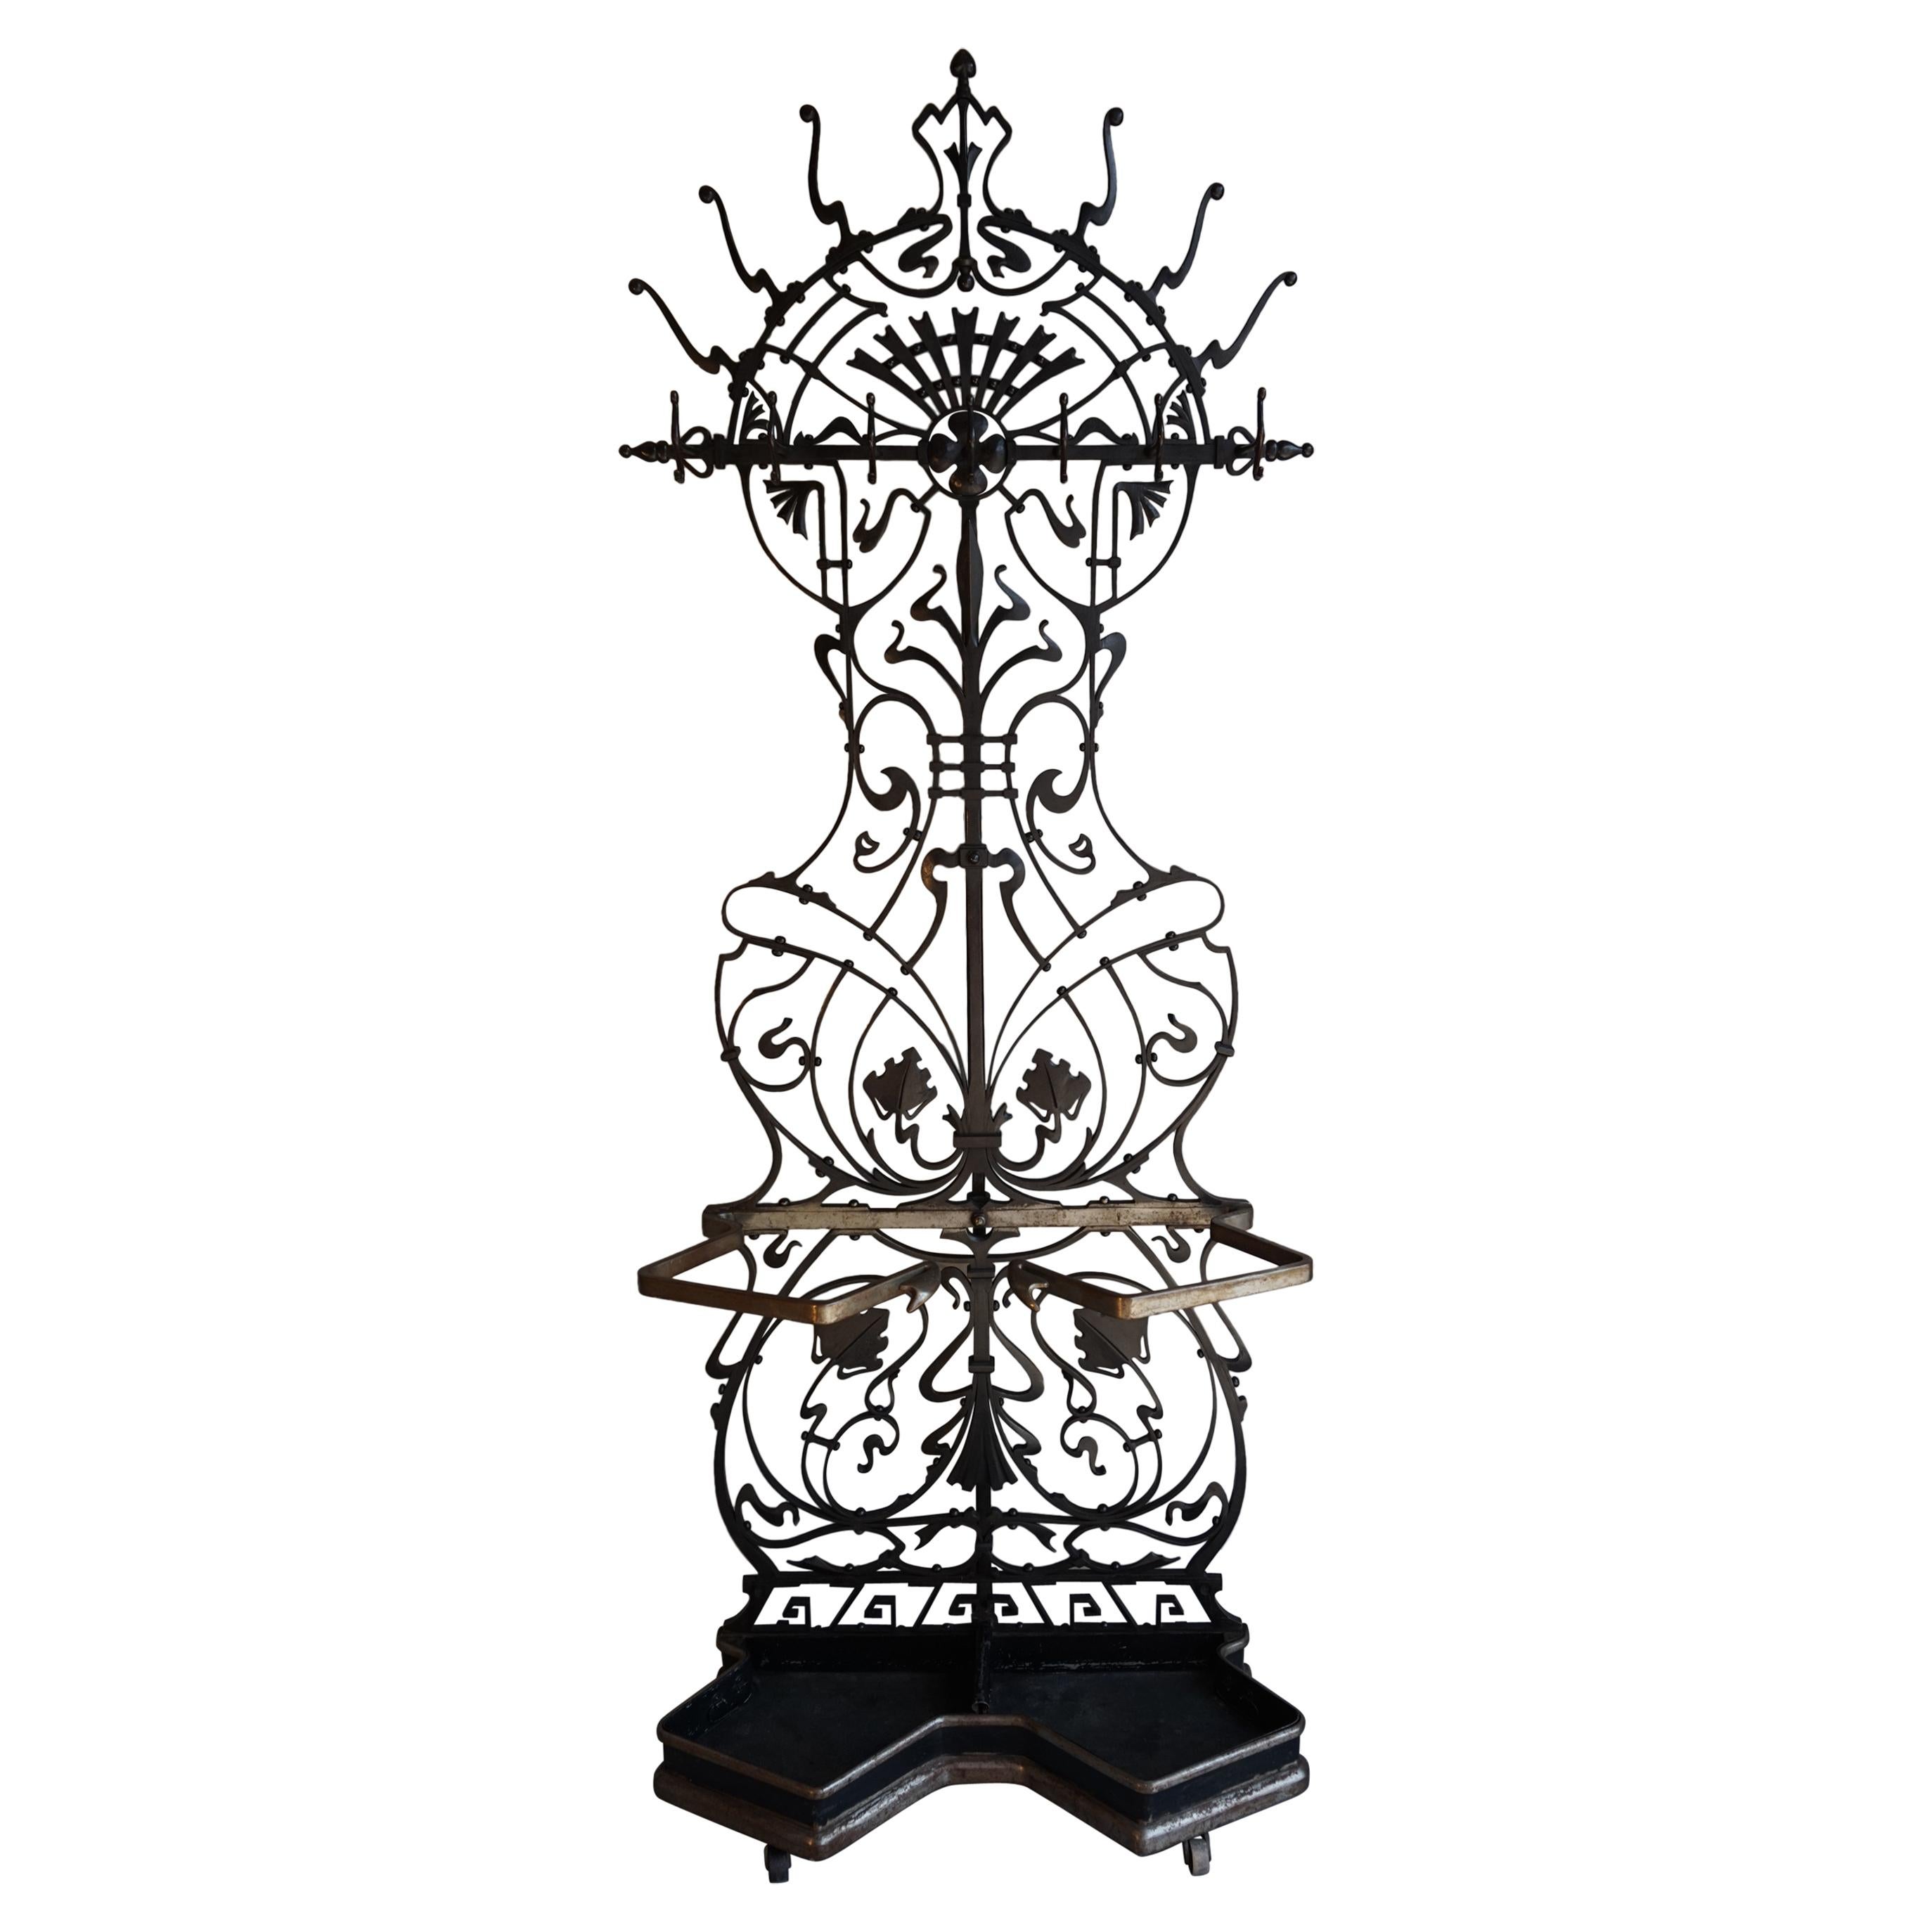 Superb Arts & Crafts Hand Forged Wrought Iron Hall Coat Rack and Umbrella Stand